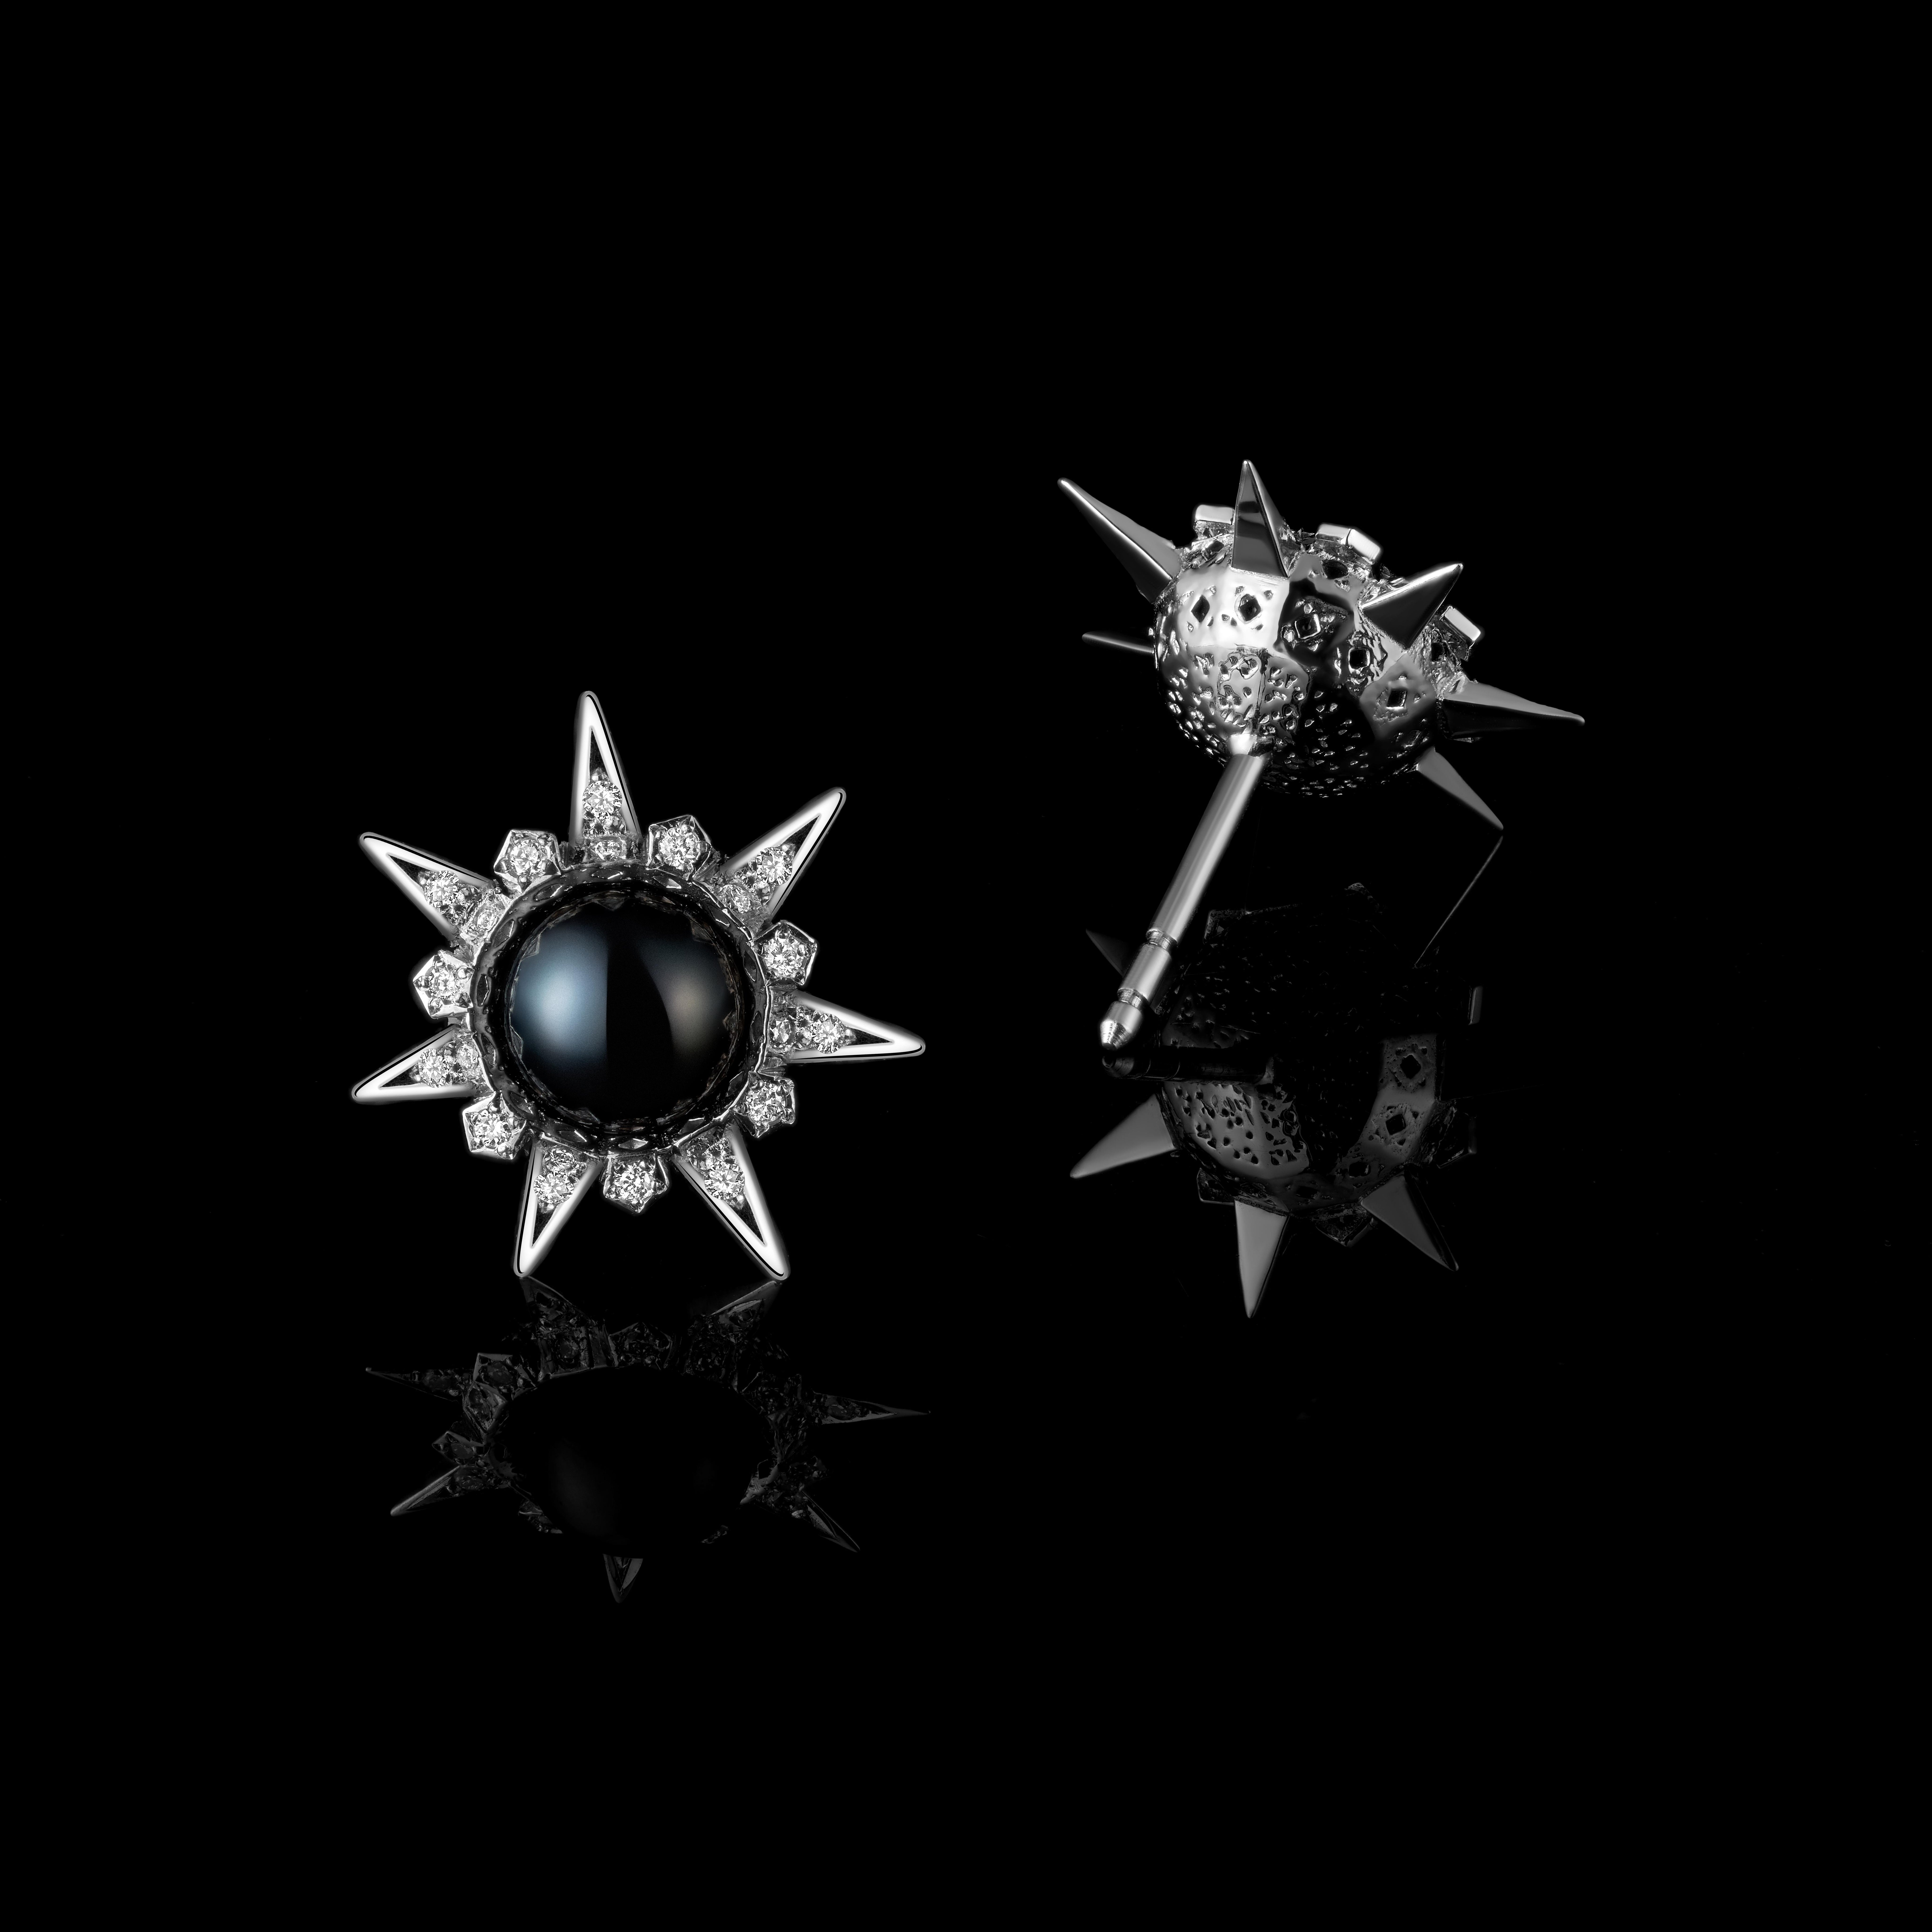 Stud earrings in 18K white gold set with exemplary black Tahitian pearls and accented with diamonds in a Star pattern. Detailed metal working on front and back. Secure alpha back. A small piece with a large impact - showing creativity, intricacy,